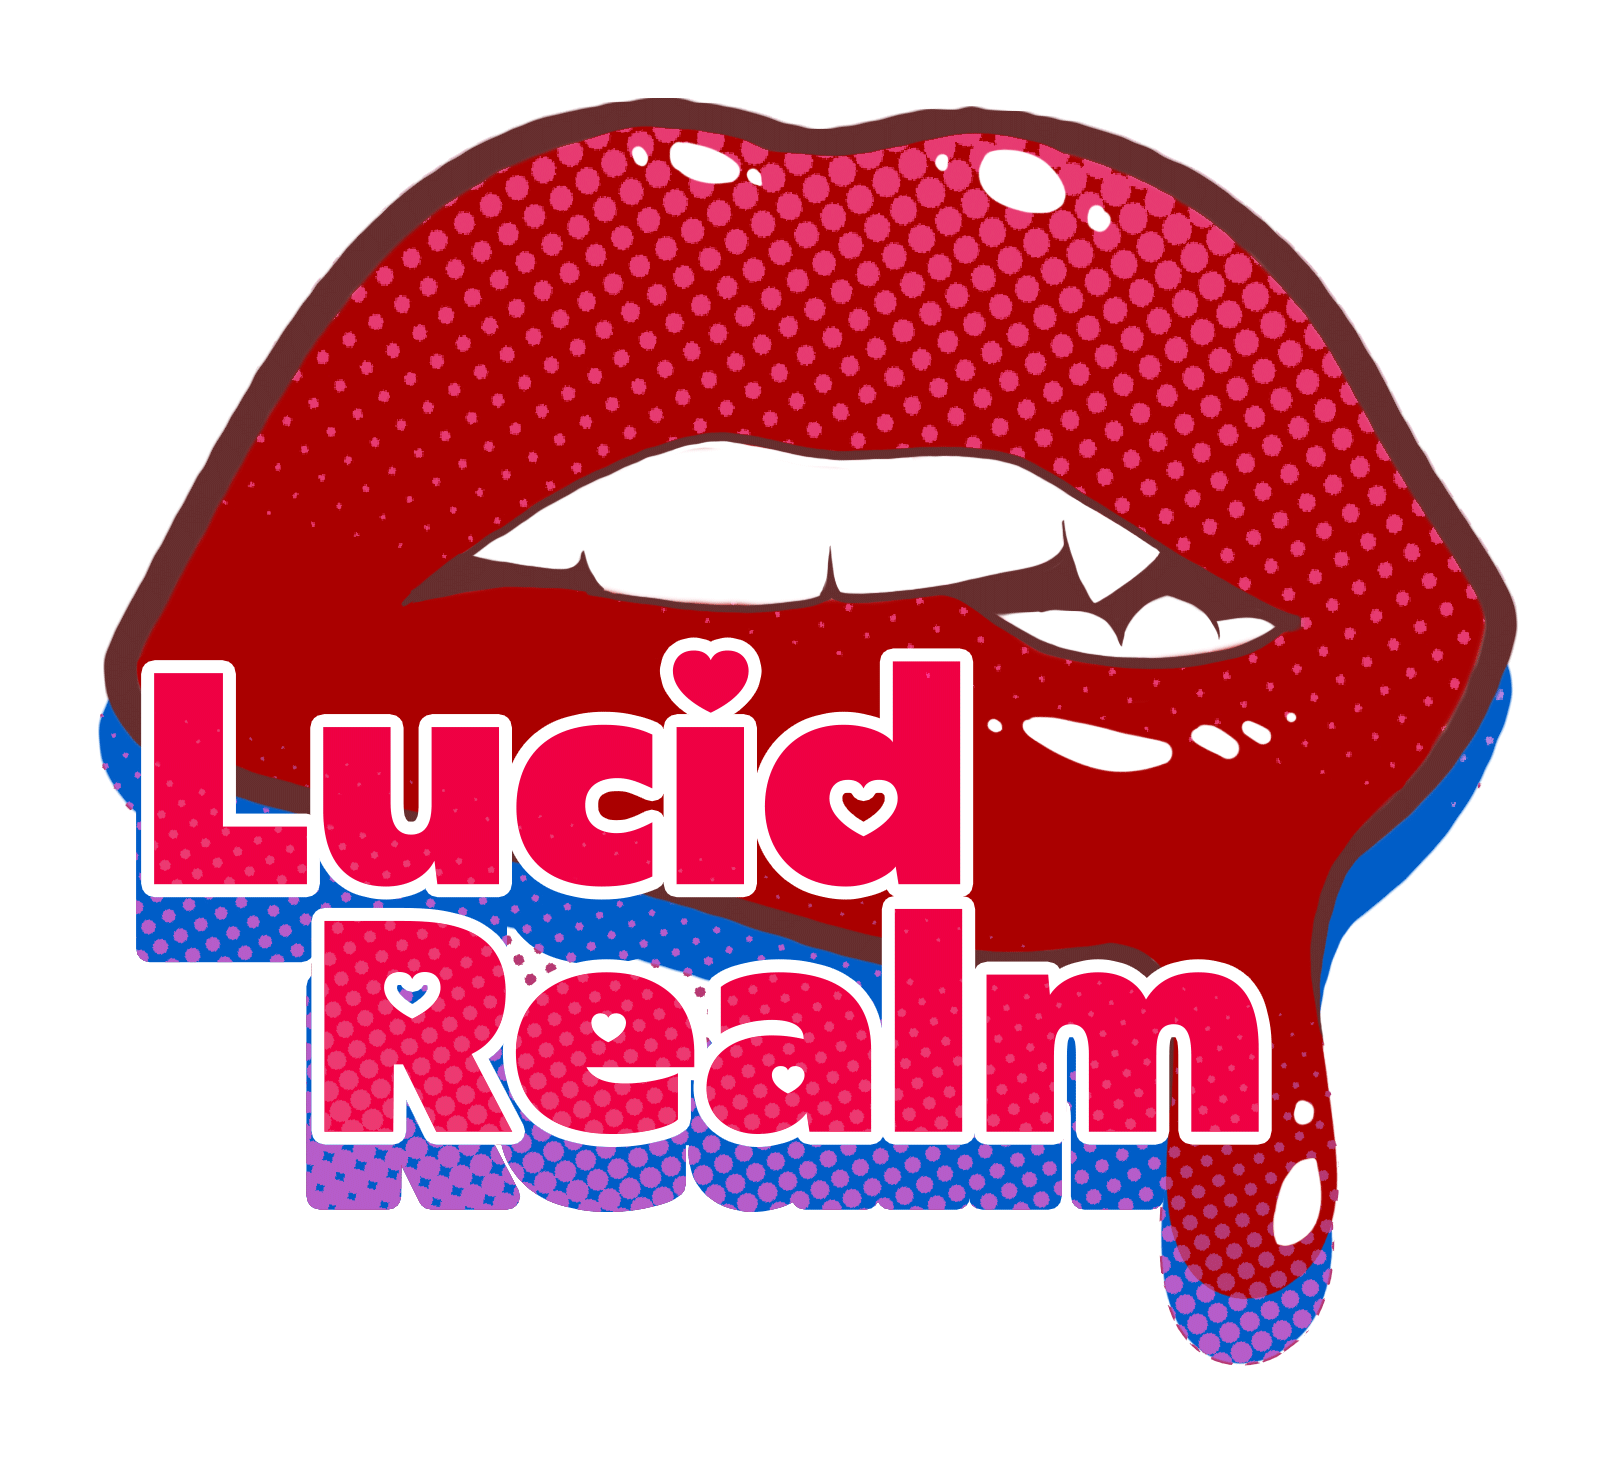 Lucid Realm Games - The Realm